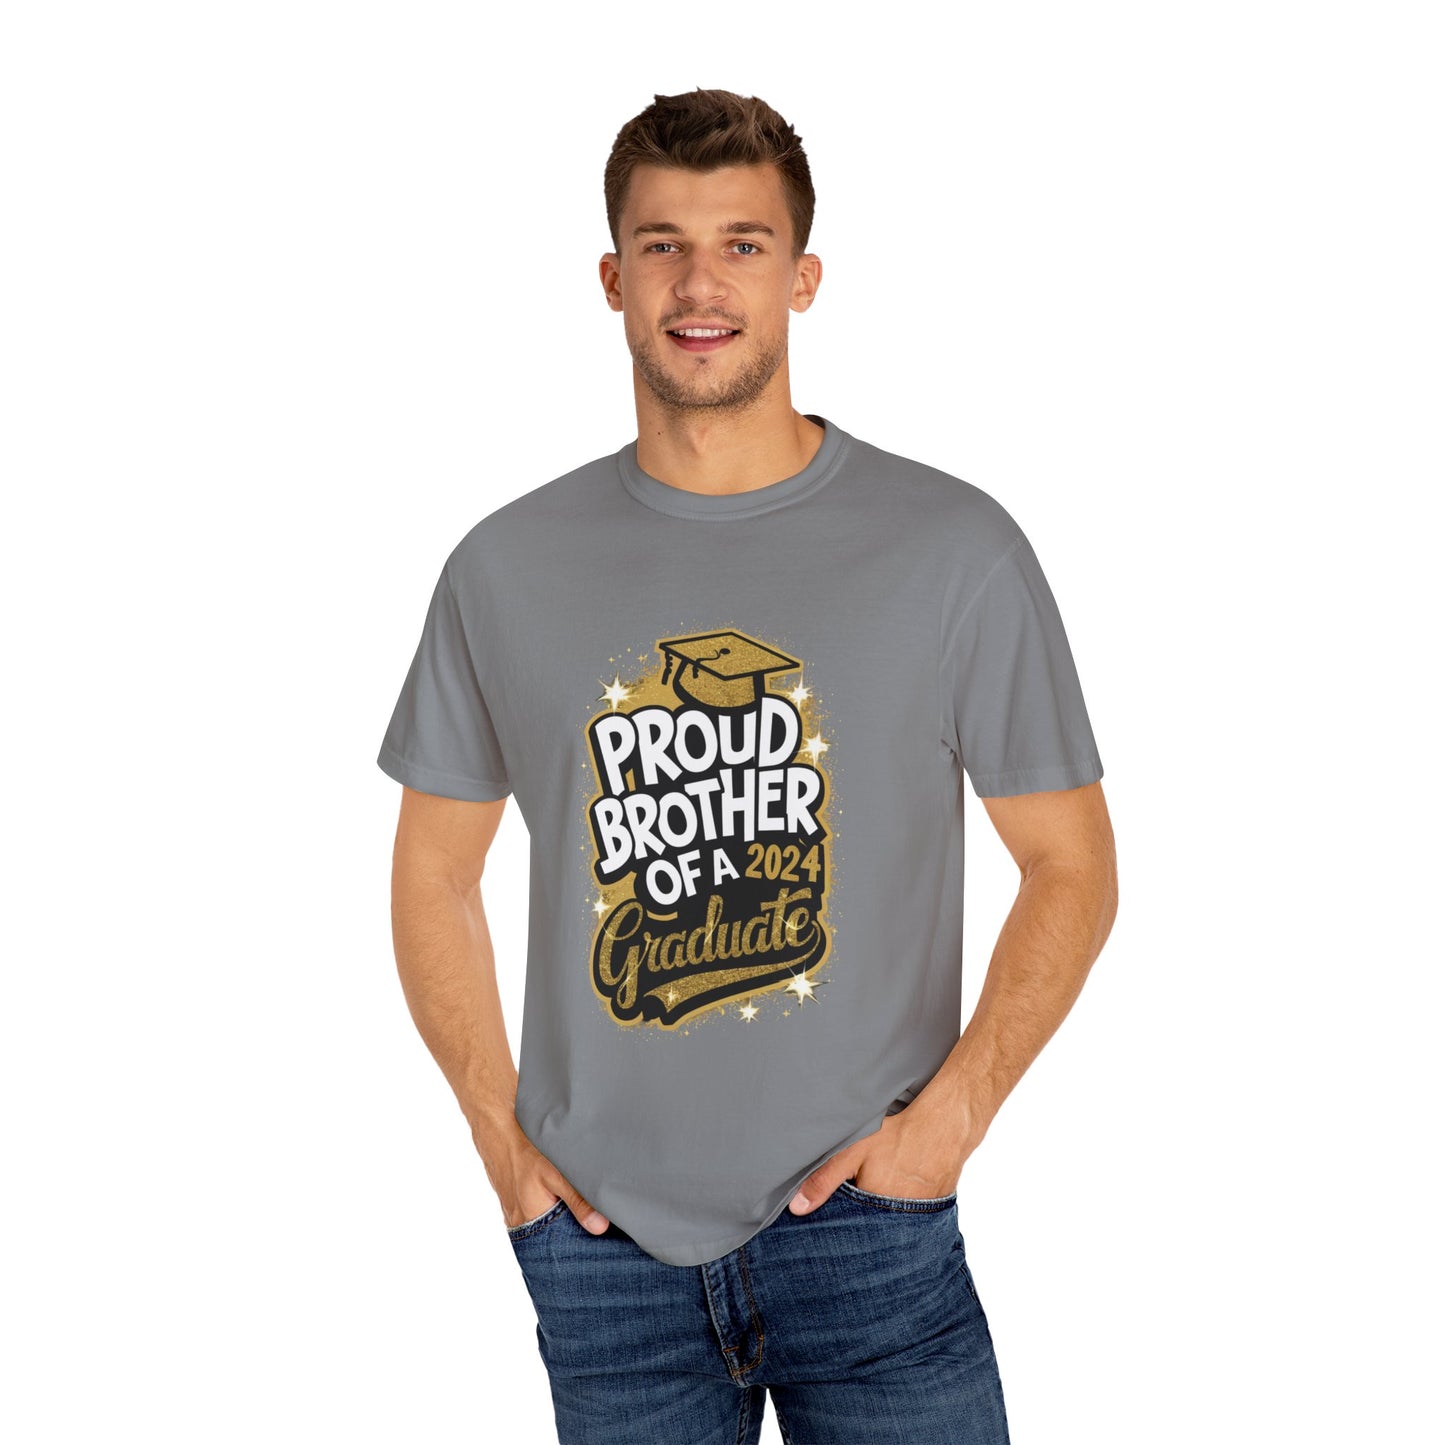 Proud Brother of a 2024 Graduate Unisex Garment-dyed T-shirt Cotton Funny Humorous Graphic Soft Premium Unisex Men Women Grey T-shirt Birthday Gift-42